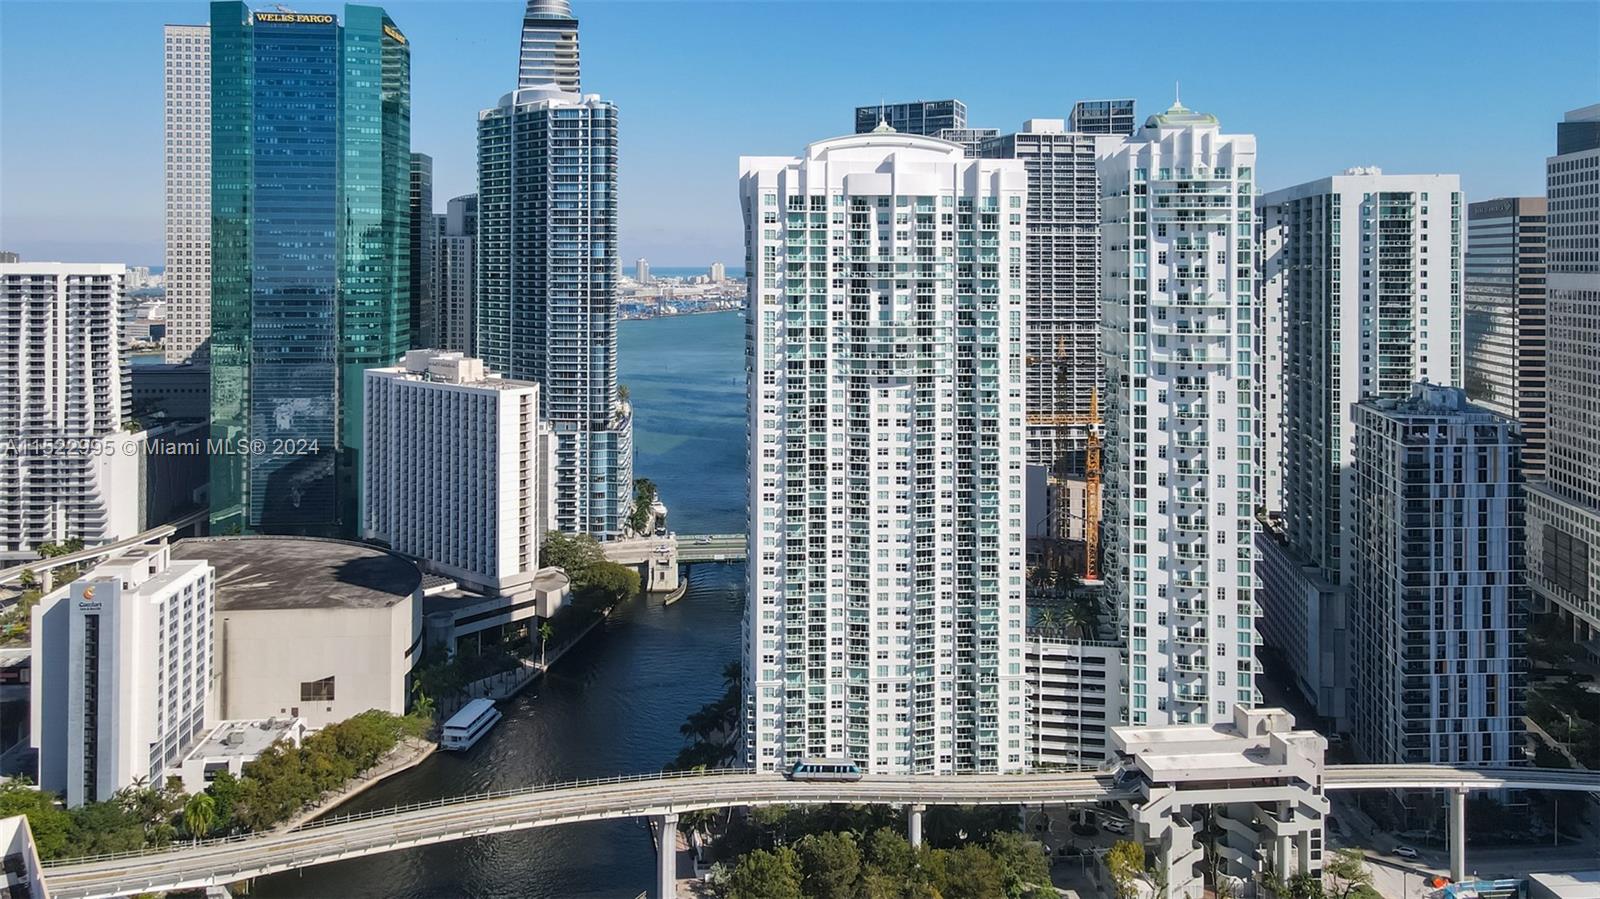 Spacious 2/2 Brickell corner unit with TWO STORAGE SPACES, PARKING ON THE SAME FLOOR, & 3 large balconies overlooking the Miami River! Wood floors with large bedrooms & living spaces make this unit unique. The storage spaces and parking are on the same floor as the residence. Amenities in Brickell on the River include 2 pools, spa, Multi-Level Fitness Center, concierge service, business center, valet parking, & 24 hour security. EXCELLENT LOCATION - next to the Metromover station and steps from Brickell City Centre, Whole Foods, and all the dining and entertainment that Brickell has to offer! Live That Brickell Life!